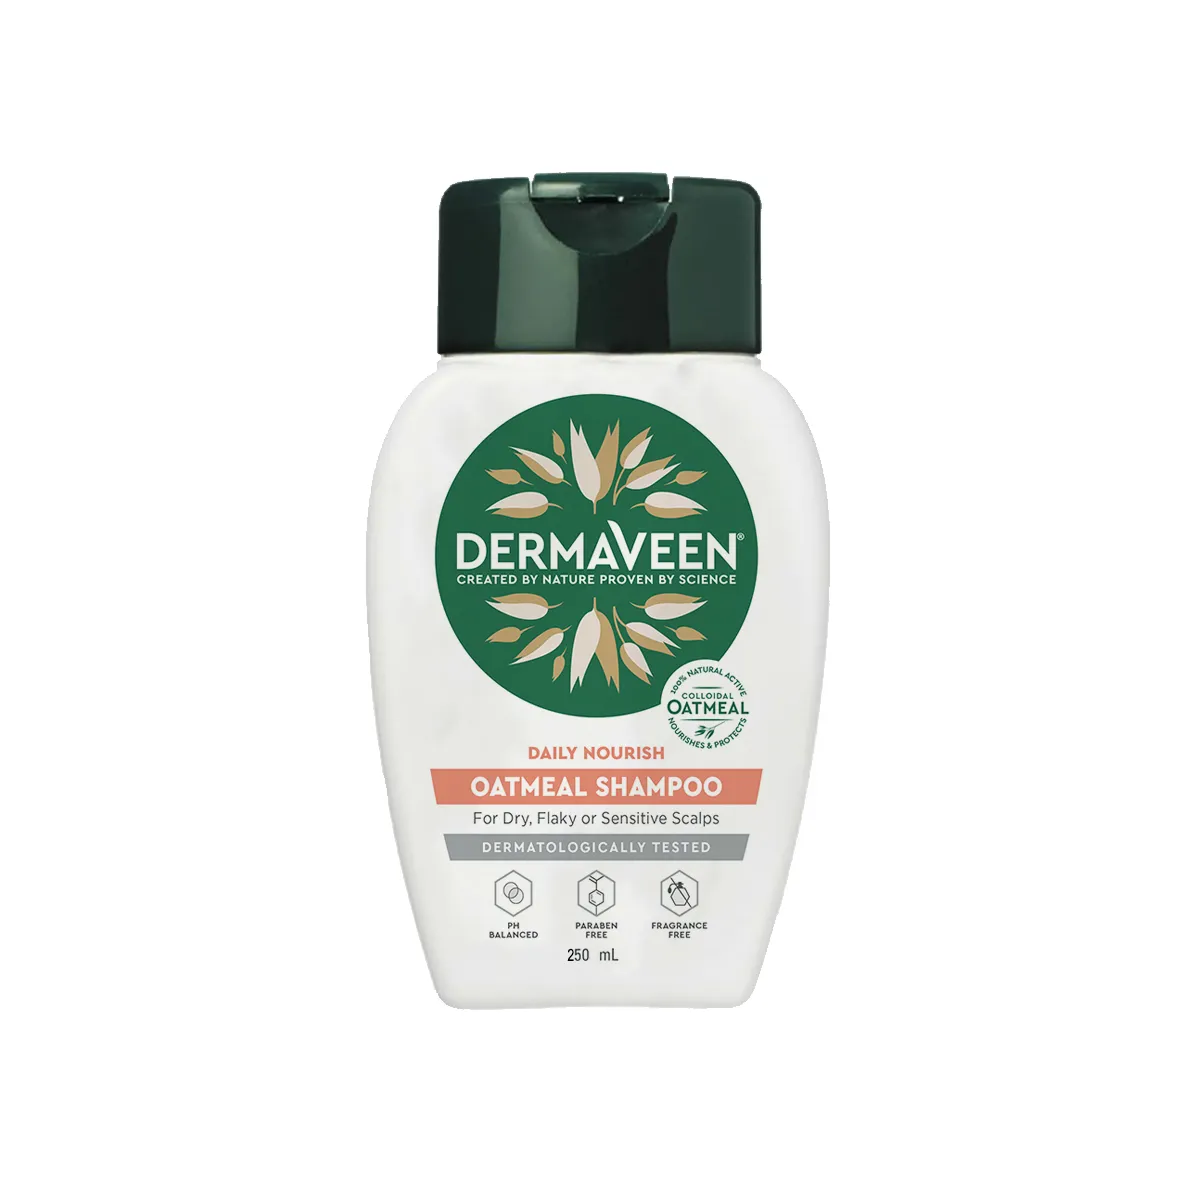 First product image of DermaVeen Oatmeal Shampoo 250ml